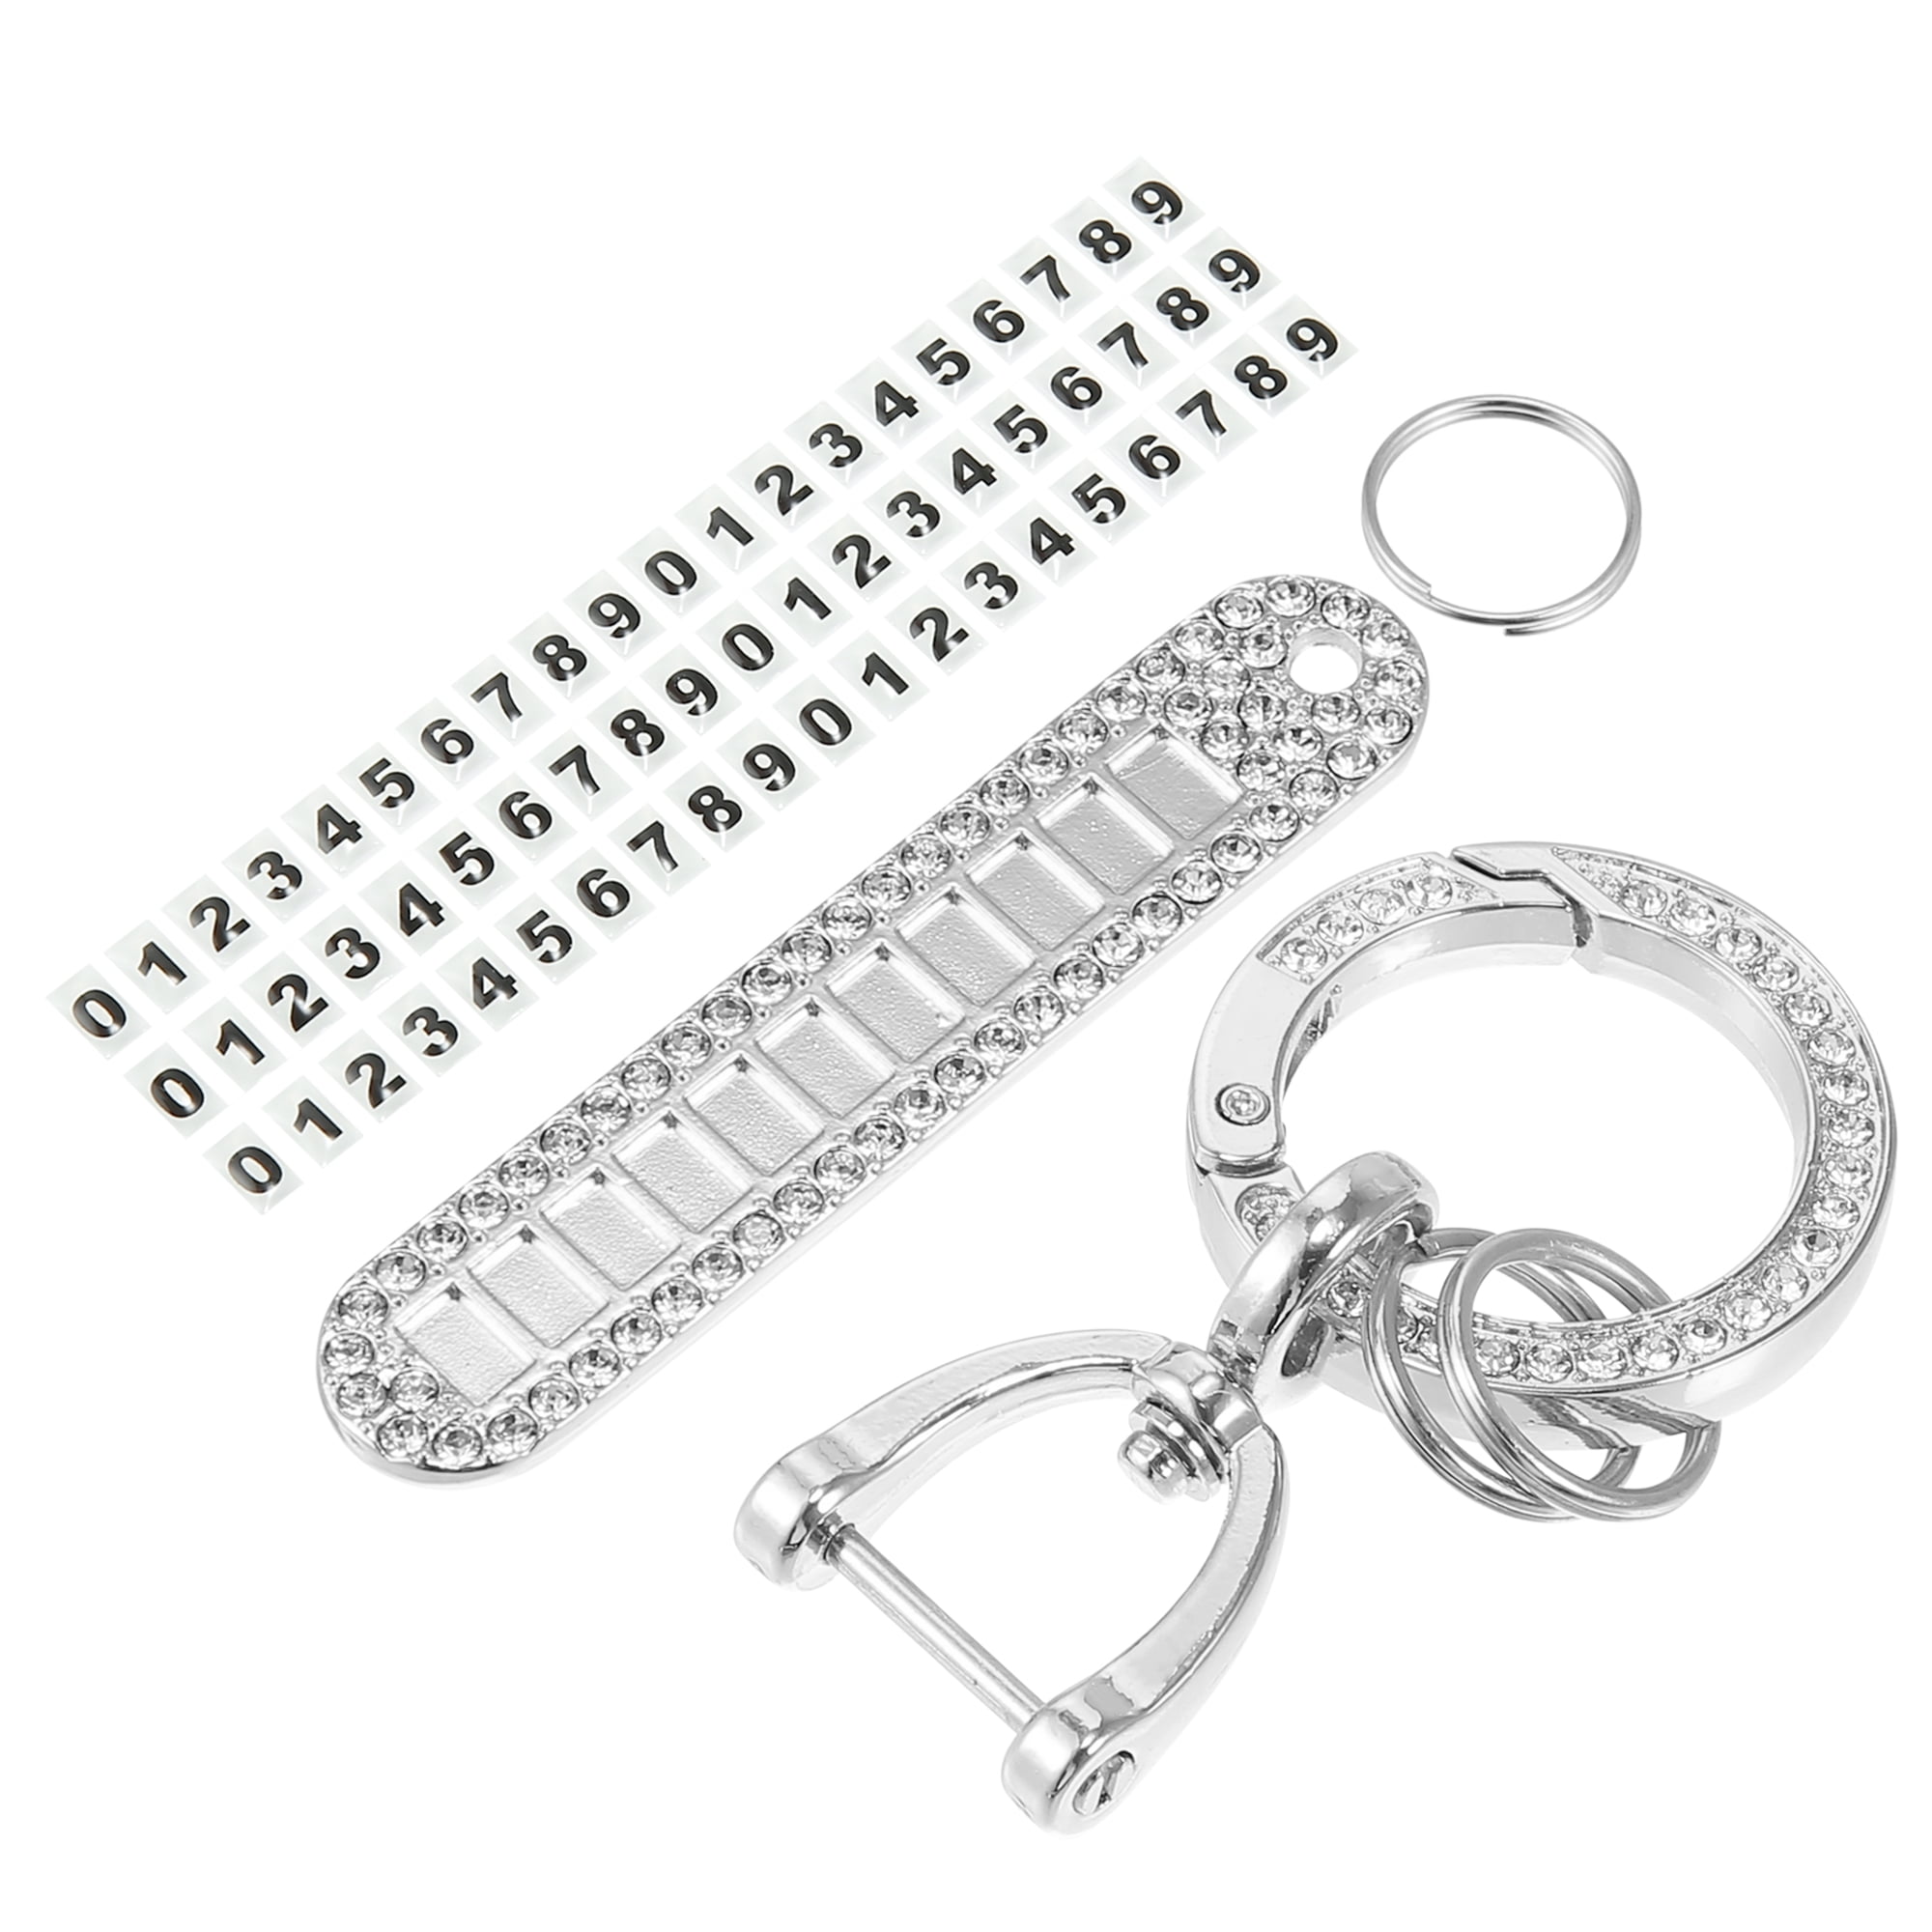 Unique Bargains Car Fob Key Chain Keychains Holder PU Leather 360 Degree  Rotatable with D Shaped Ring Key Rings Set Pink